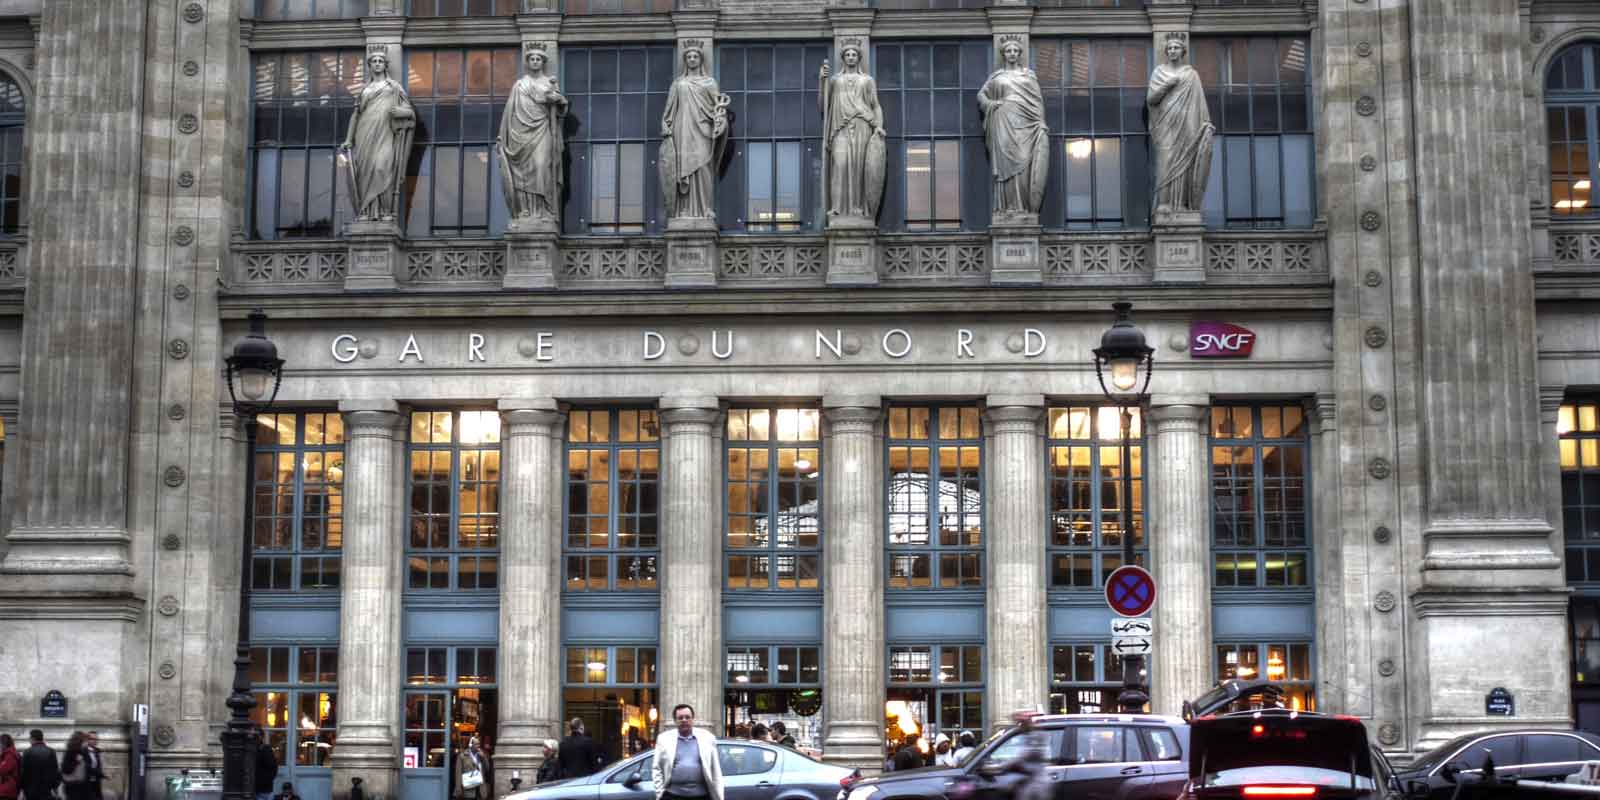 Landscape view of the outside of the Gare du Nord station in Paris, France.